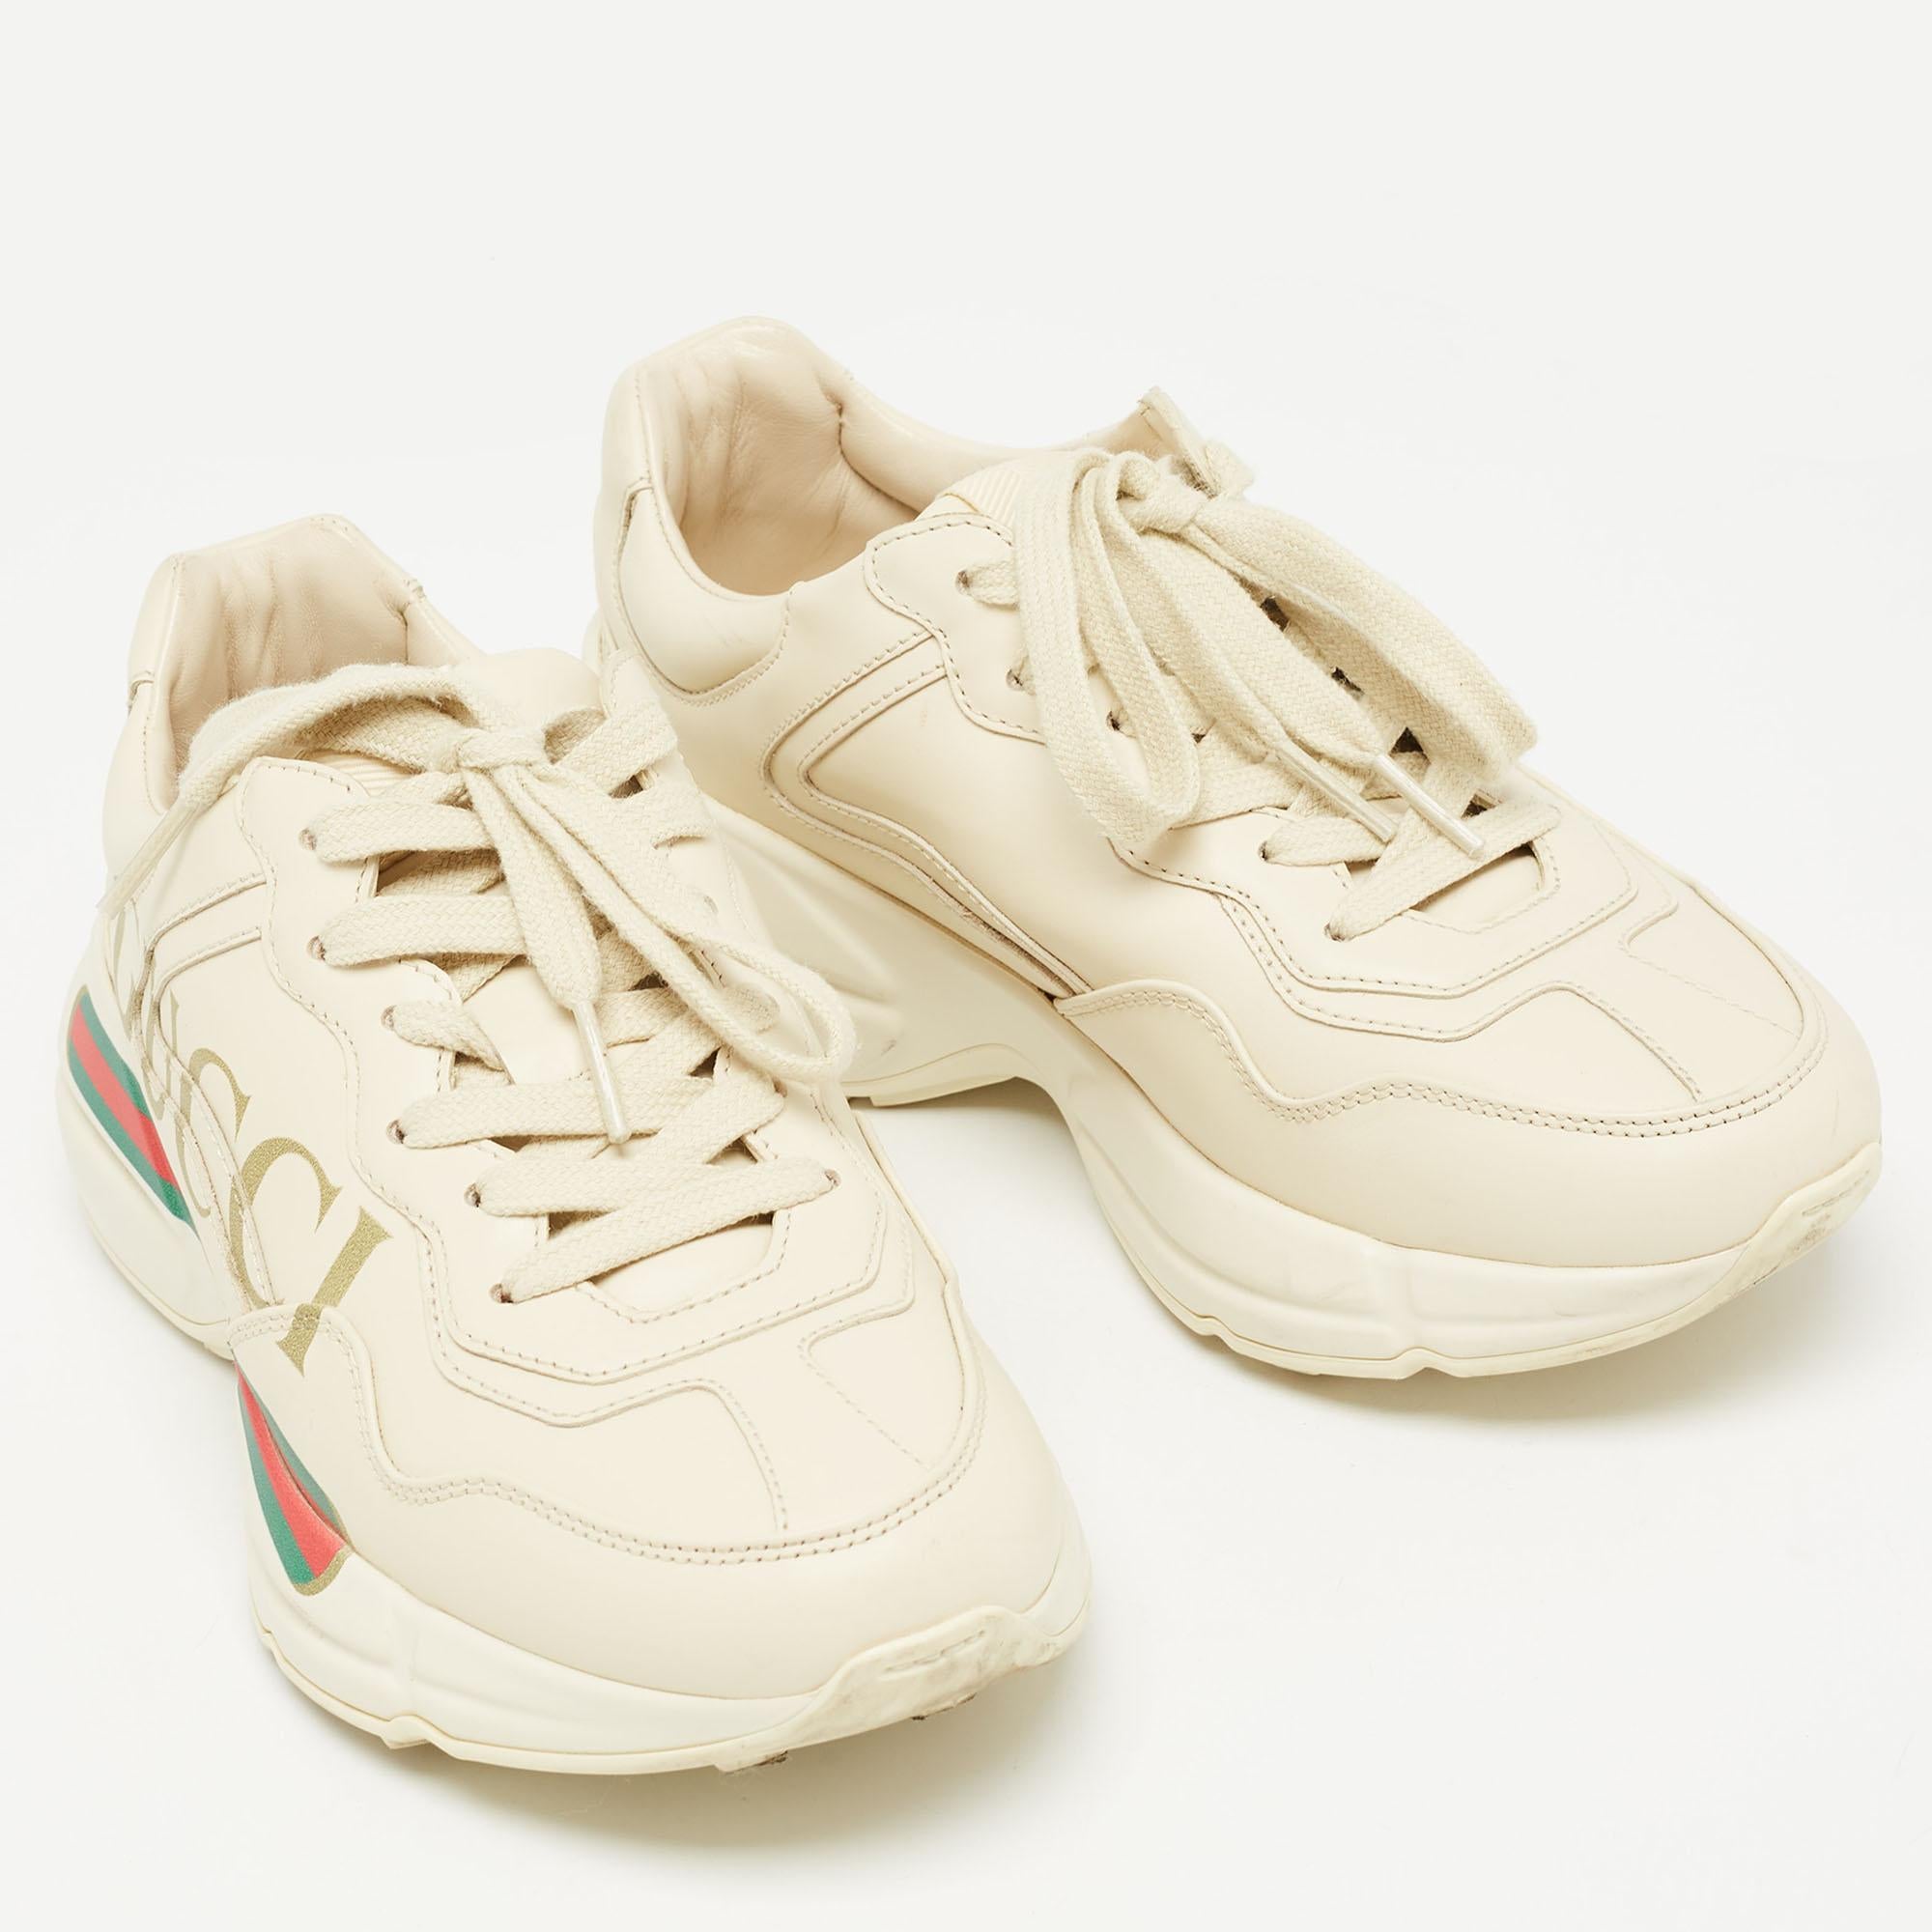 Gucci Cream Leather Rhyton Sneakers Size 35.5 3